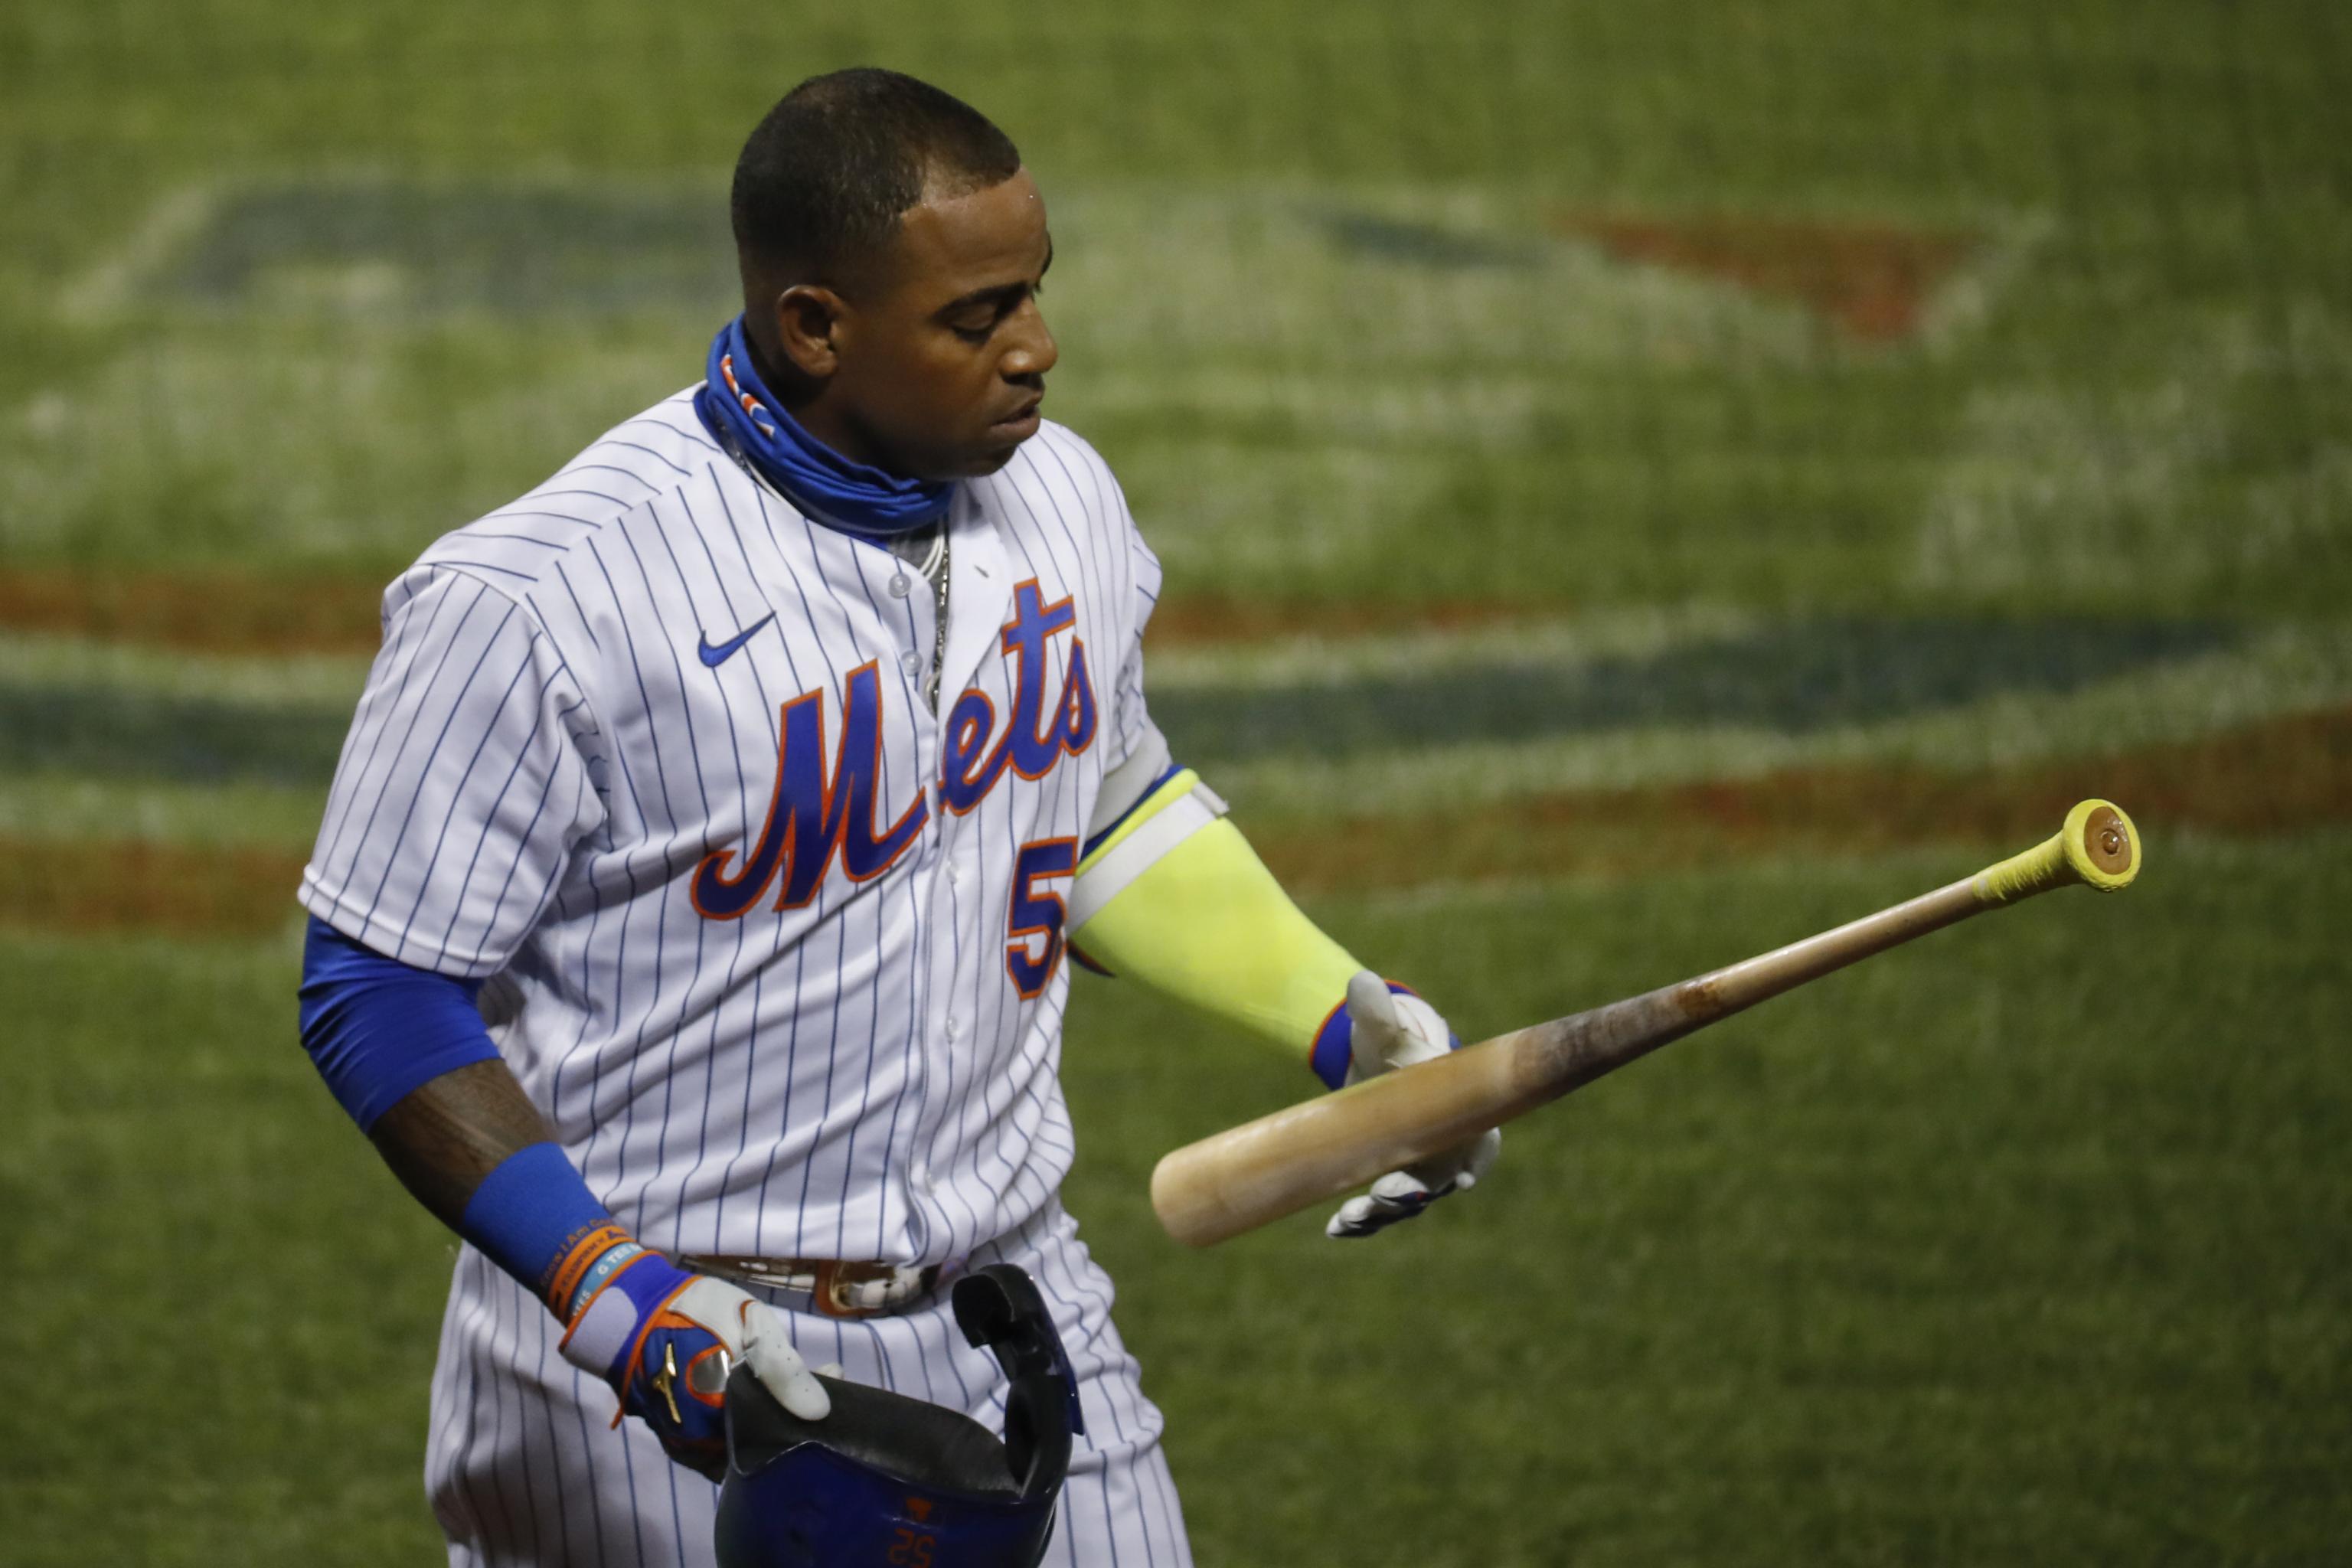 Yoenis Cespedes And The Mets, A Perfect Match - Legends On Deck